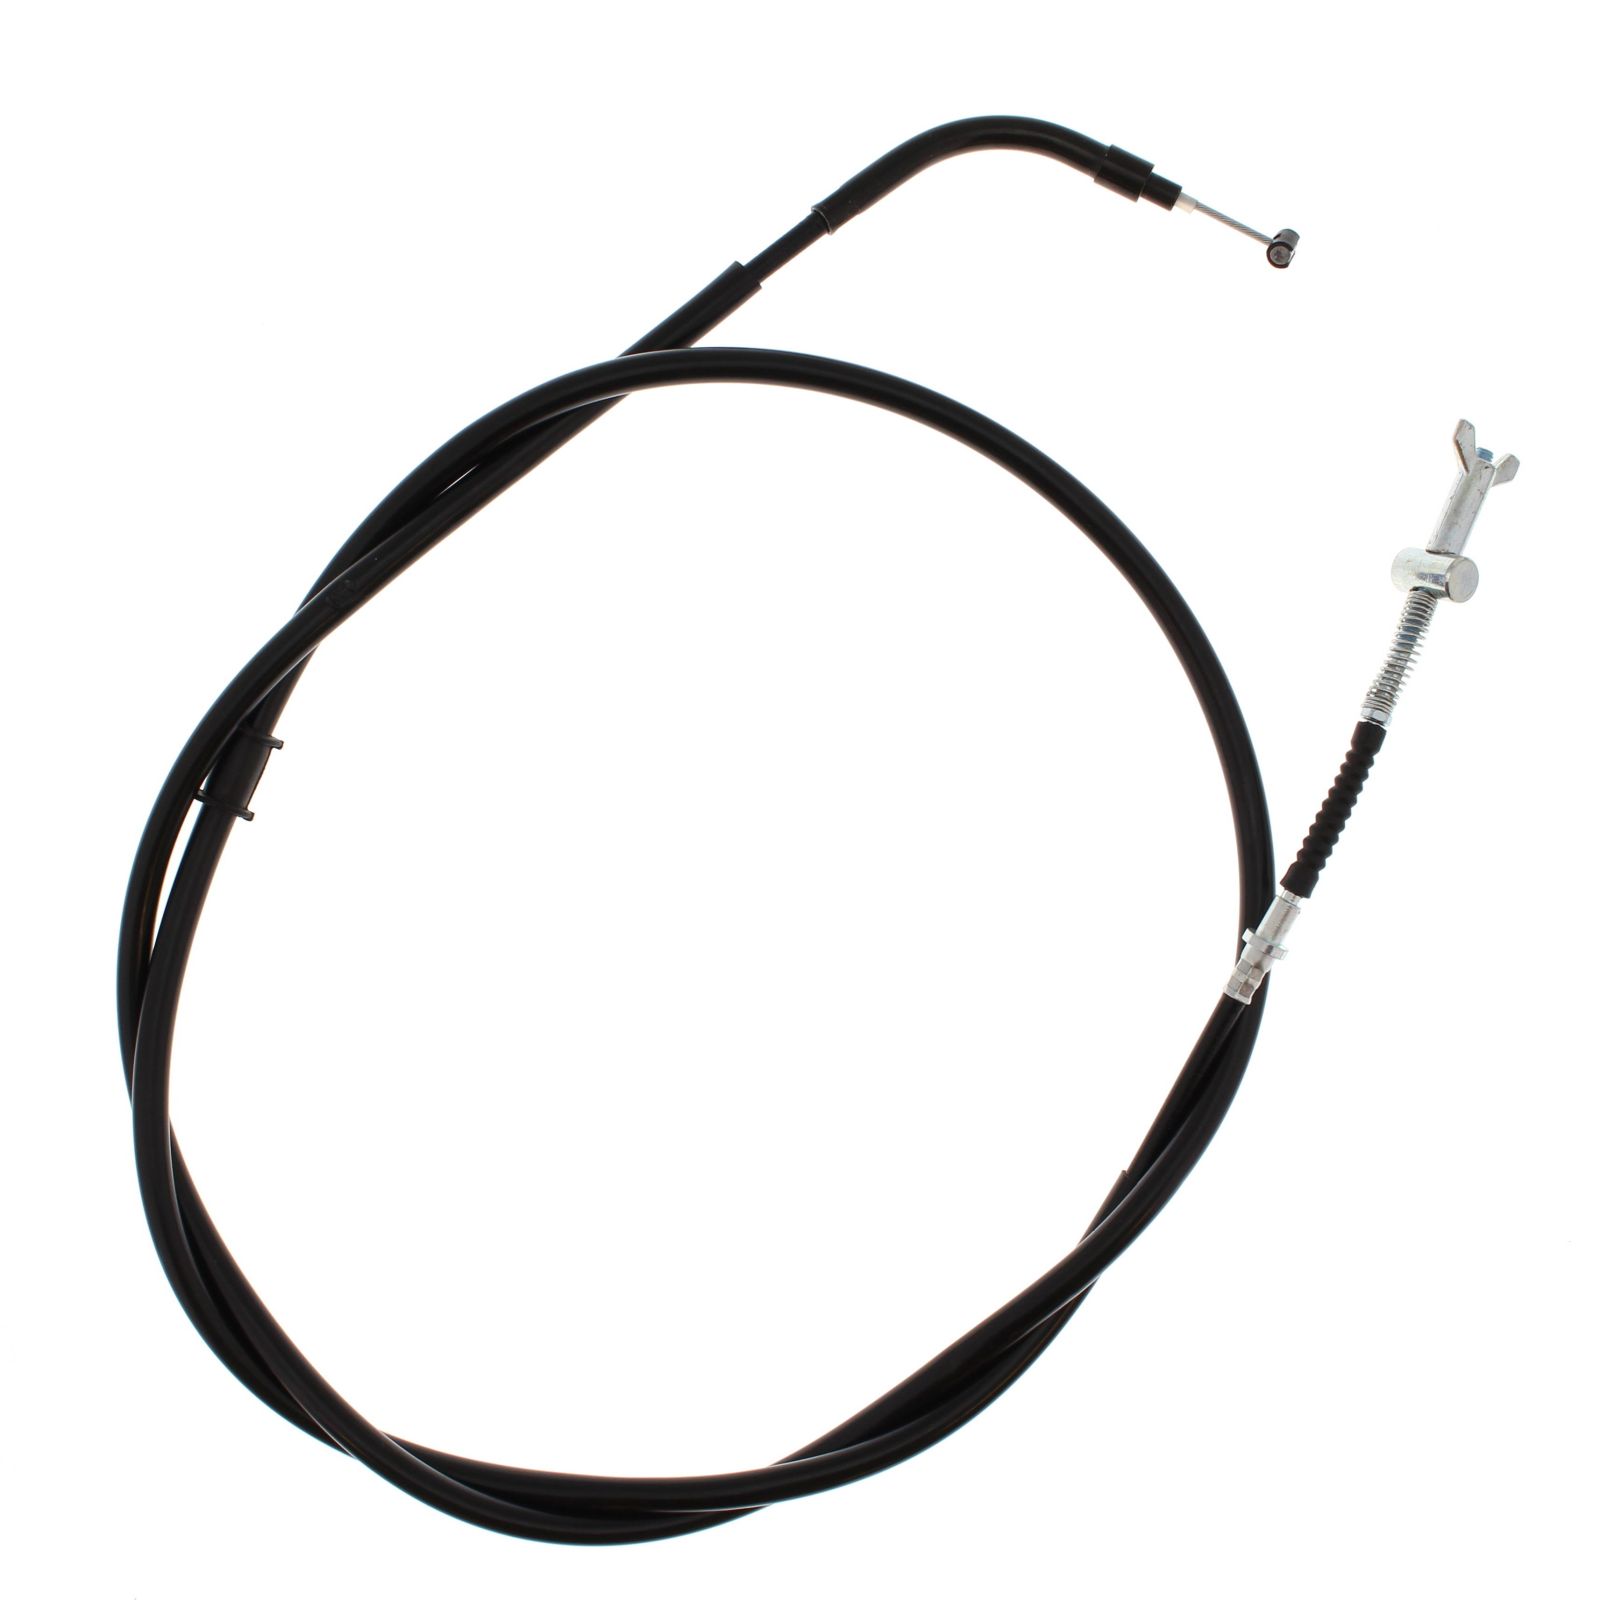 Wrp Brake Cables - WRP454043 image